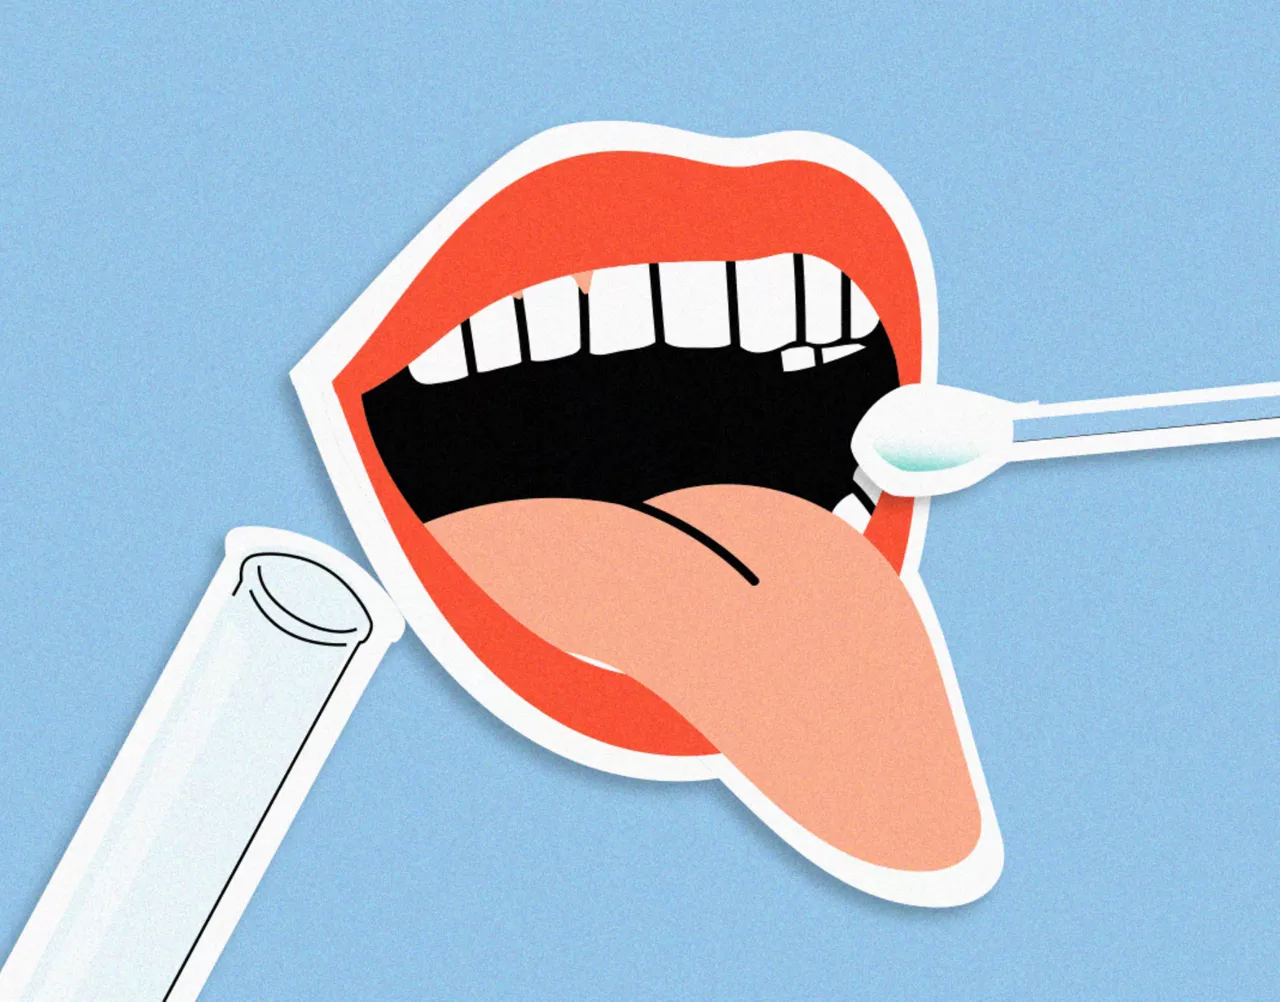 Illustration of mouth being swabbed